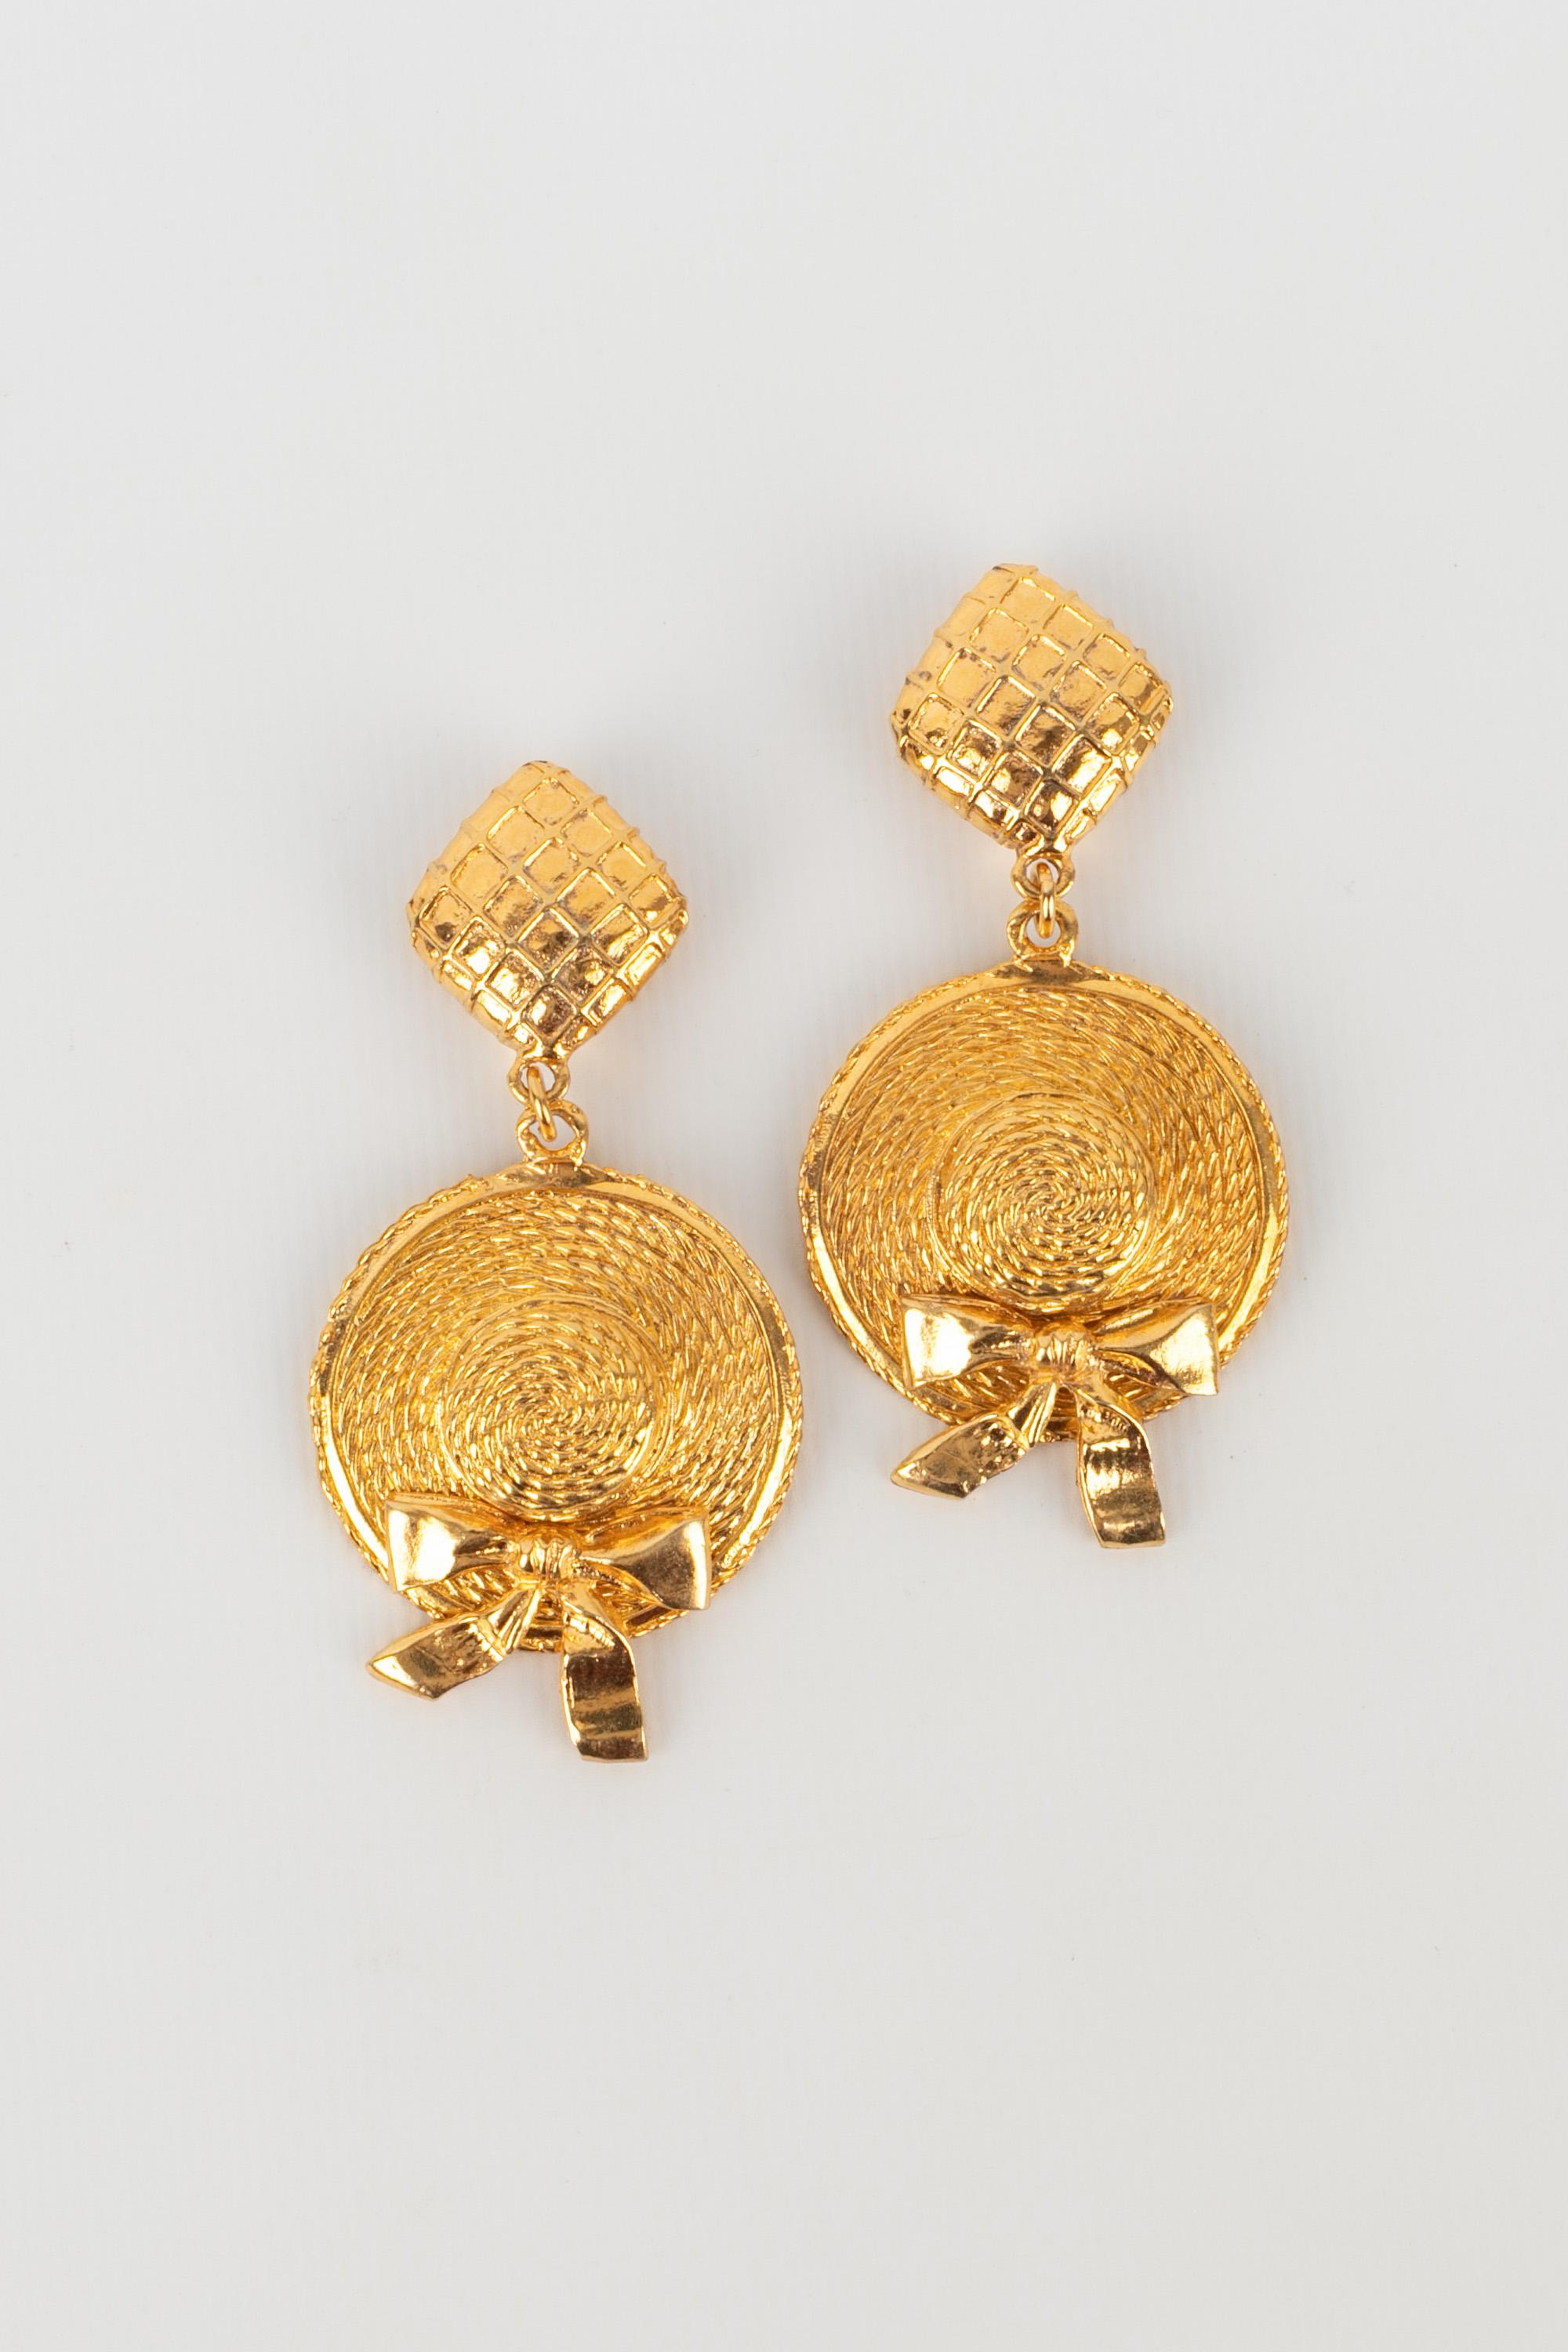 CHANEL - (Made in France) Golden metal clip-on earrings representing hats. Jewelry from the 1990s.

Condition:
Very good condition

Dimensions:
Height: 7.5 cm

BOB95